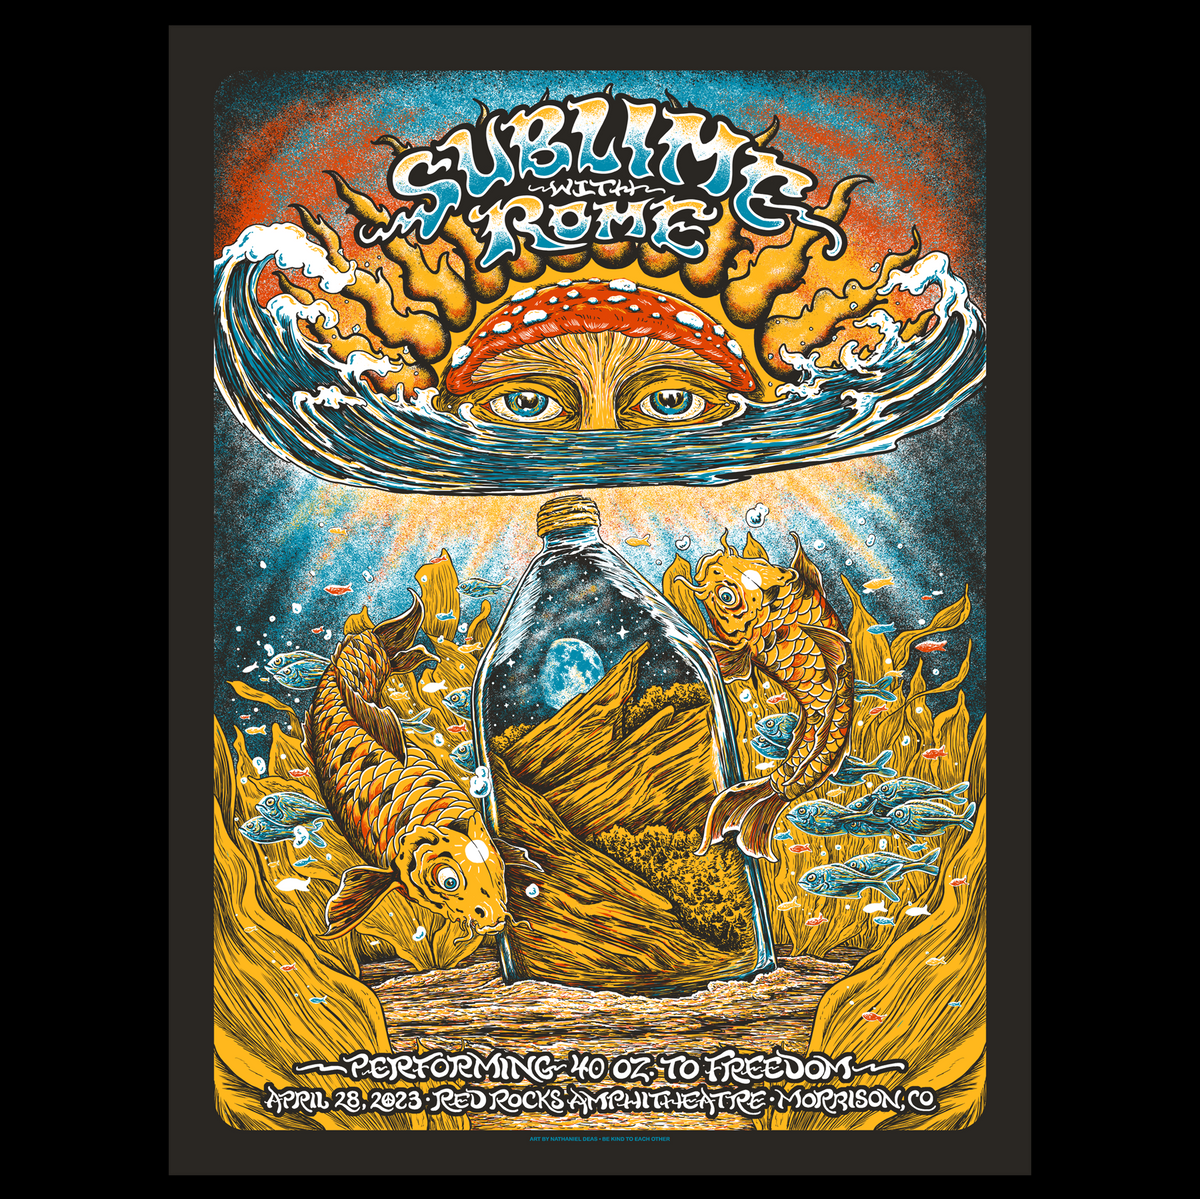 Red Rocks Poster Sublime With Rome Merch Store